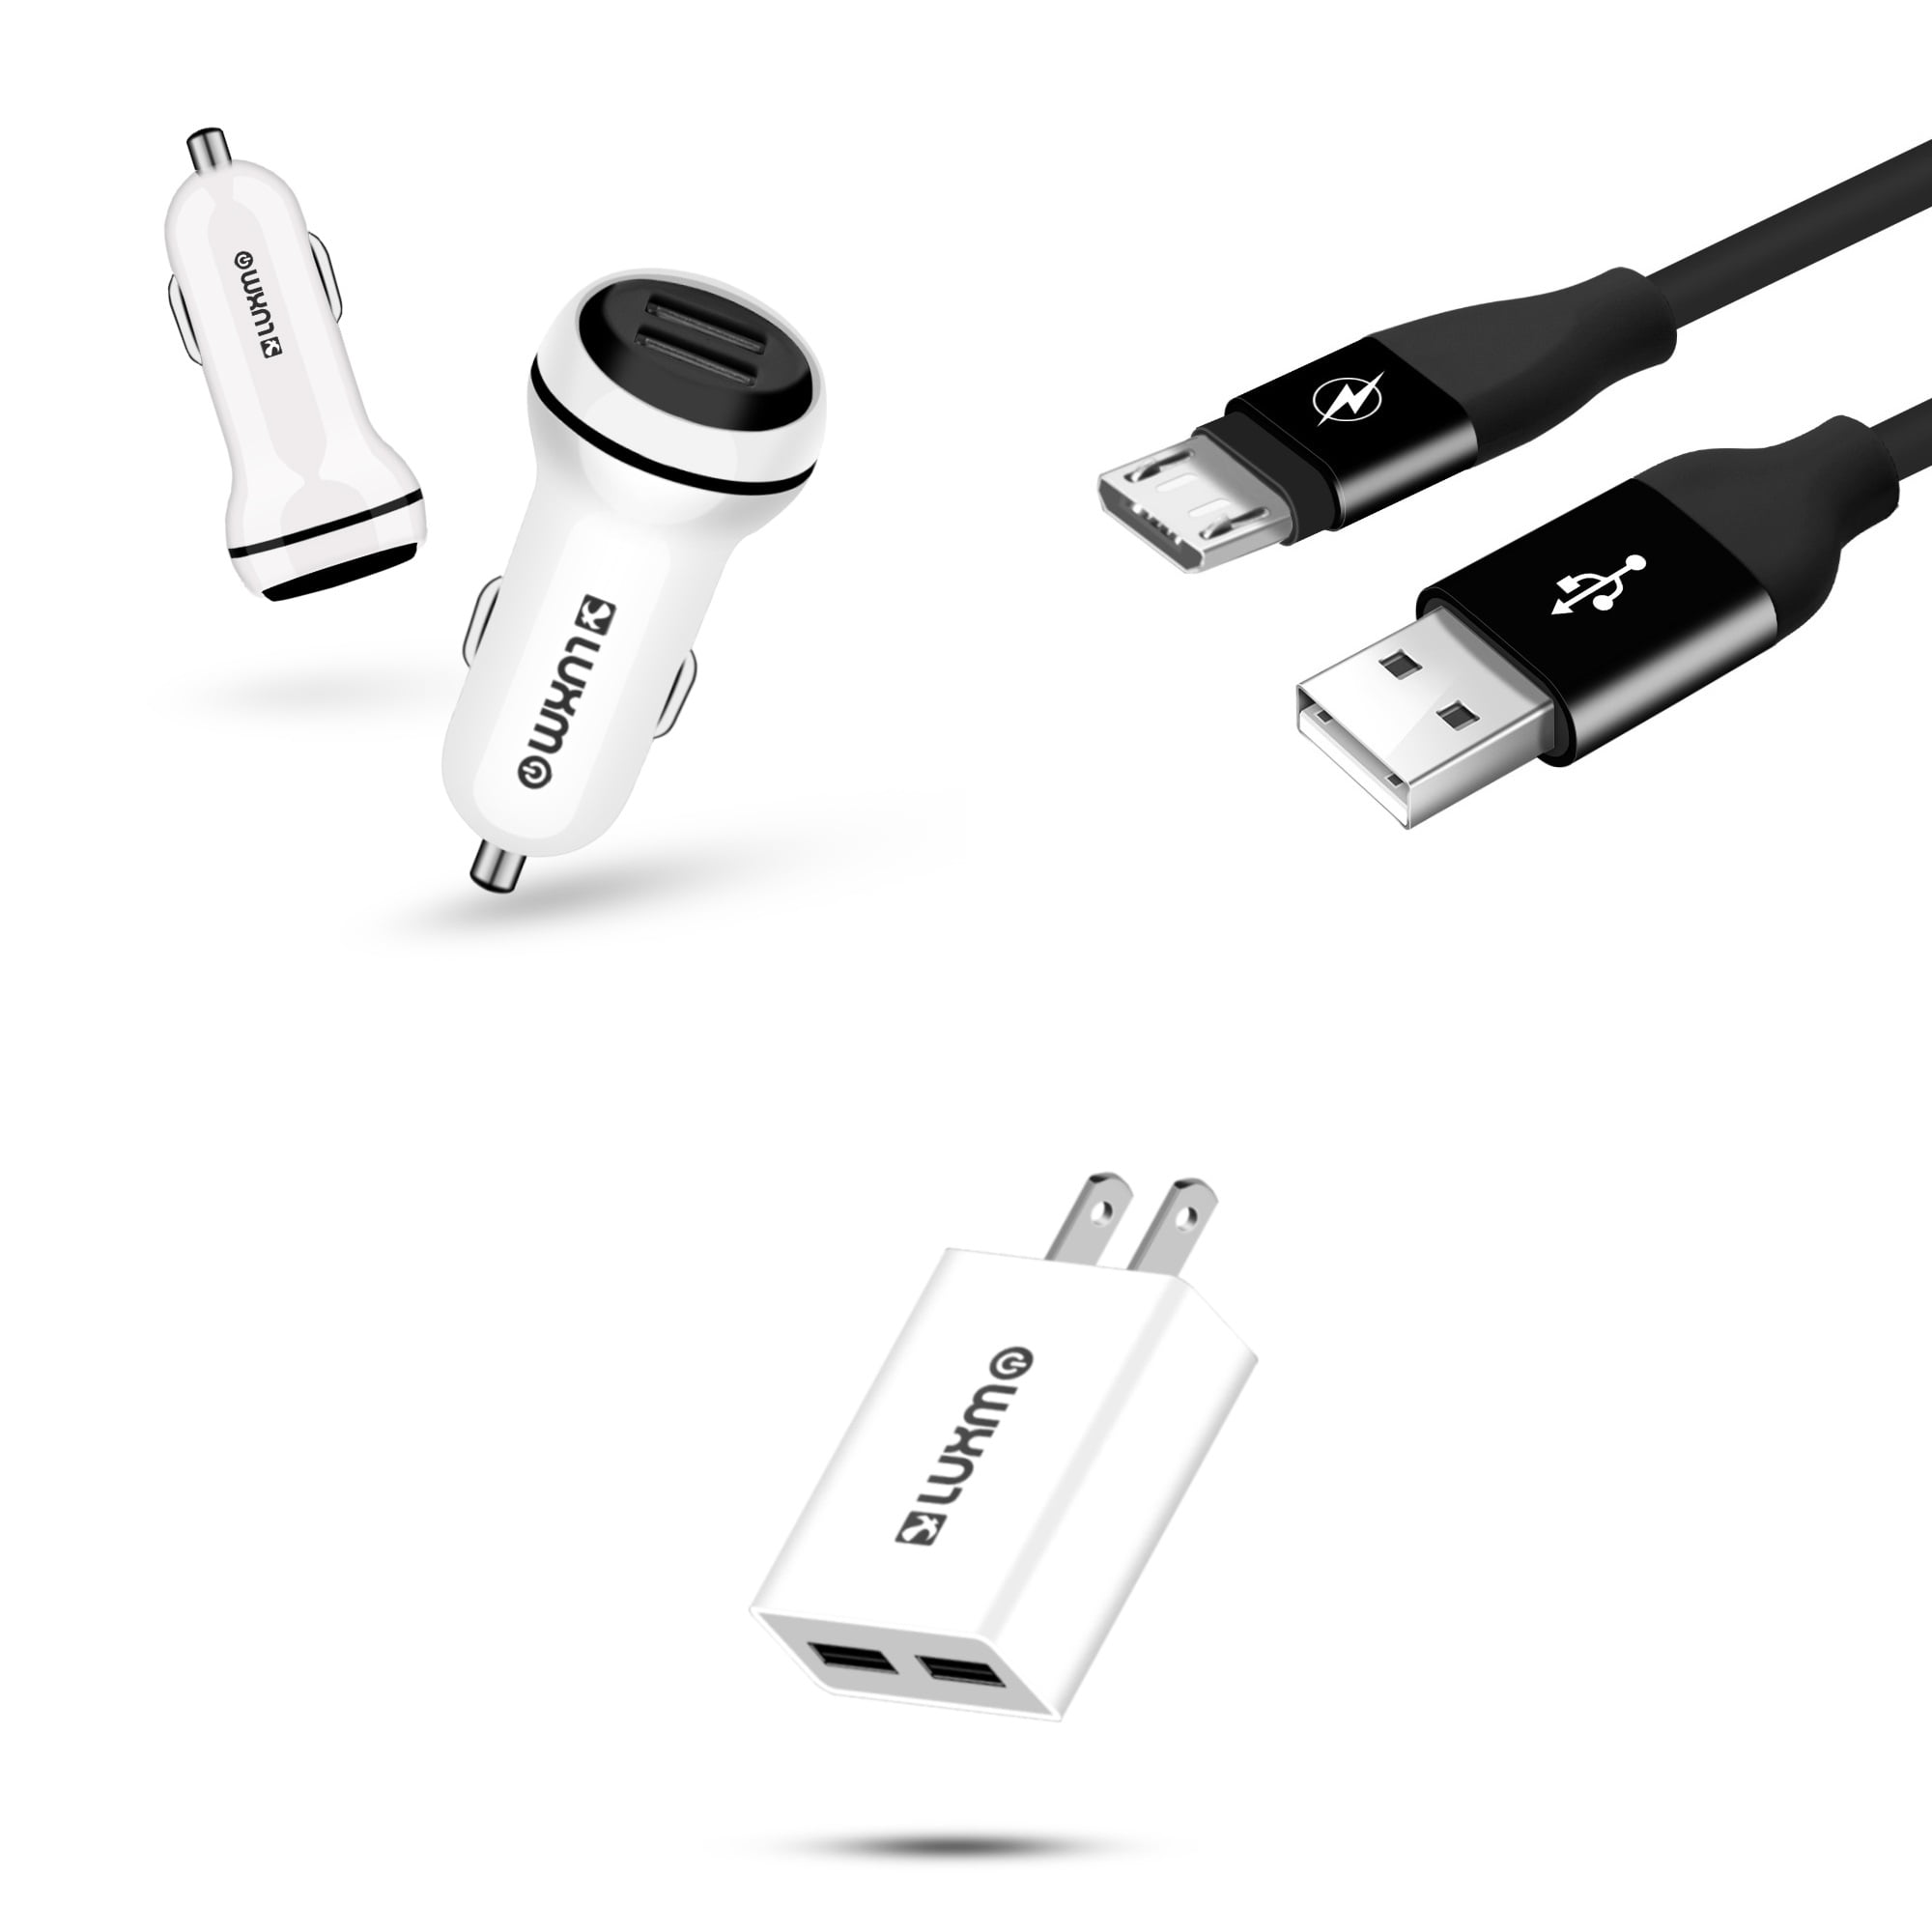 PRO OTG Power Cable Works for Alcatel 5050Y with Power Connect to Any Compatible USB Accessory with MicroUSB